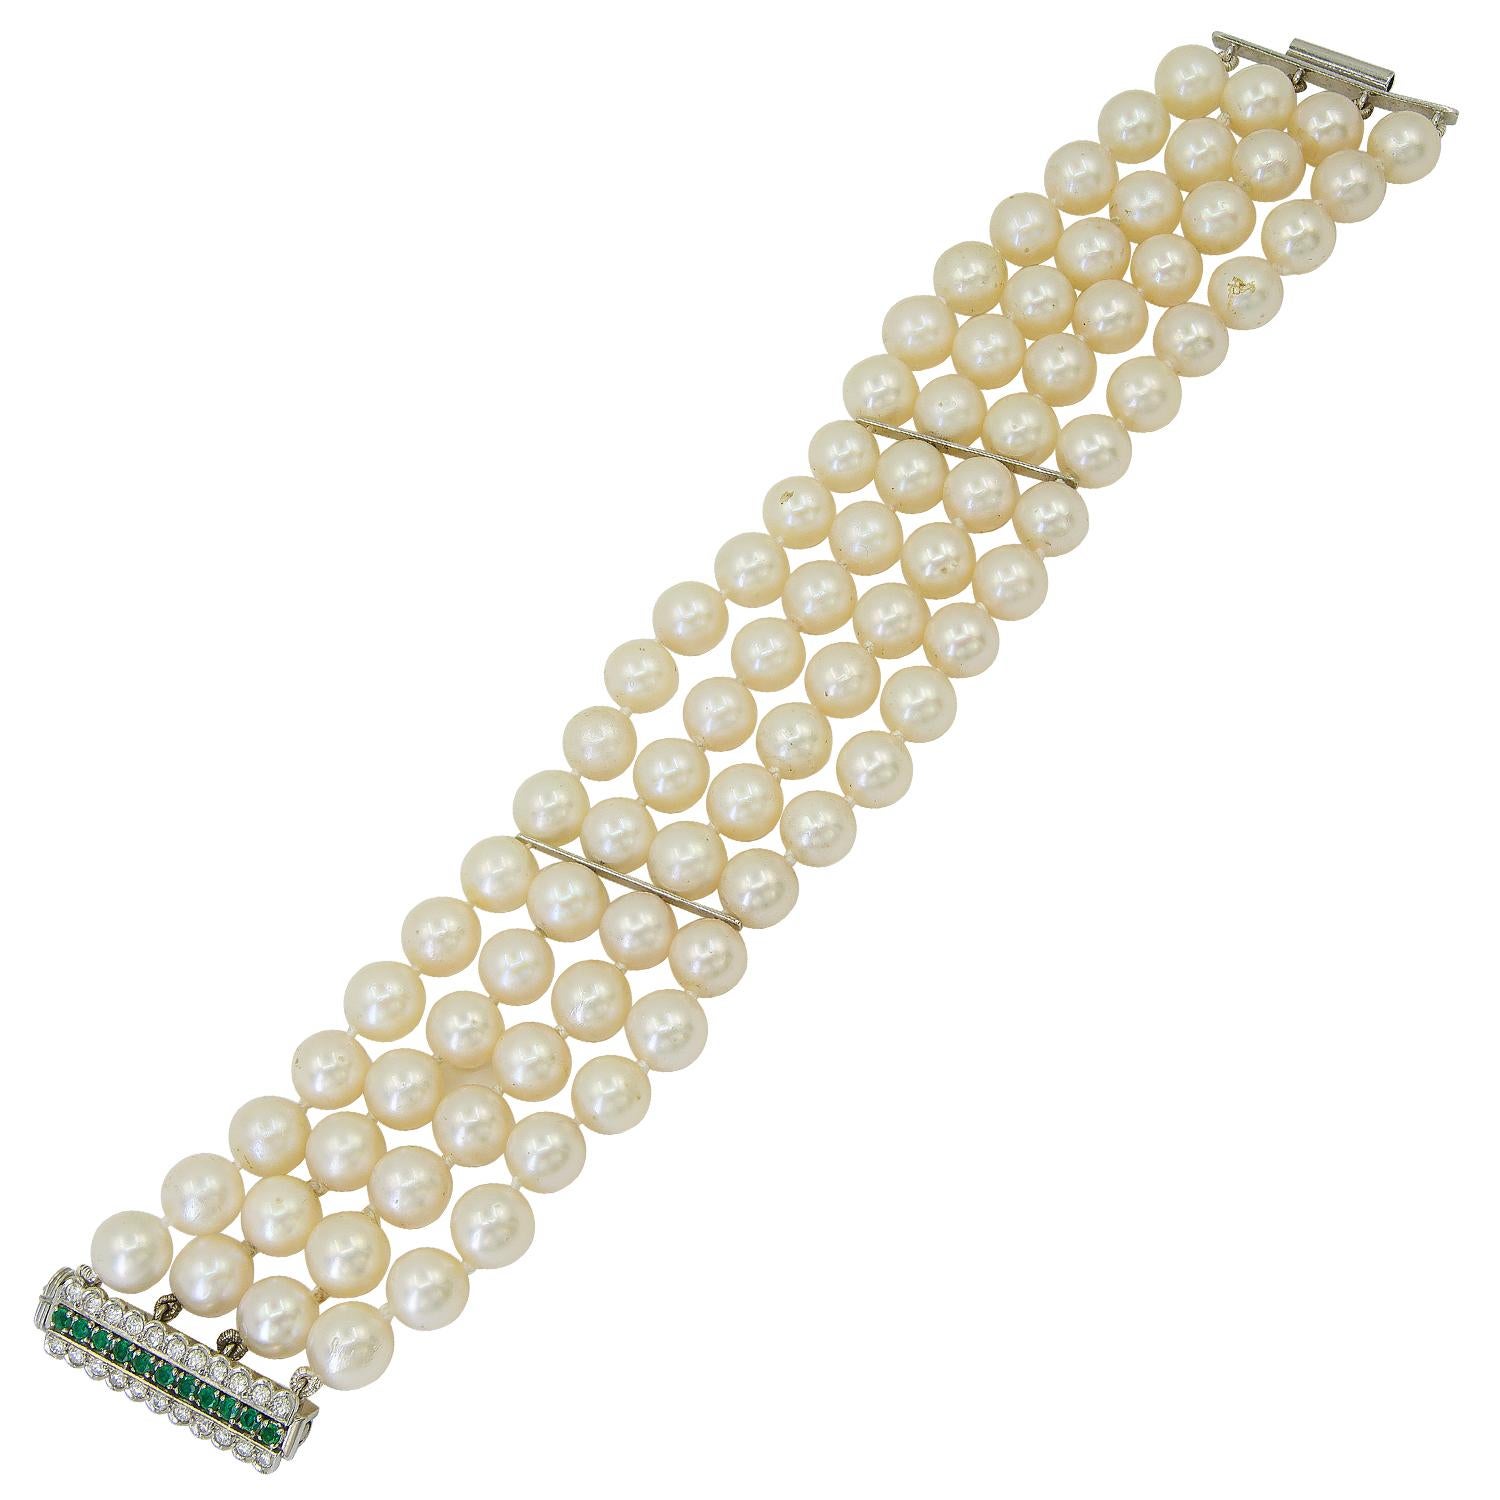 Four Row Pearl, Diamond Emerald Bracelet
A multi strand cultured pearls, diamonds and emerald bracelet.
Metal: platinum
Pearls: approx. 7.7mm
measures approx. 7″ in length by 1.25″ width
circa 1990s
